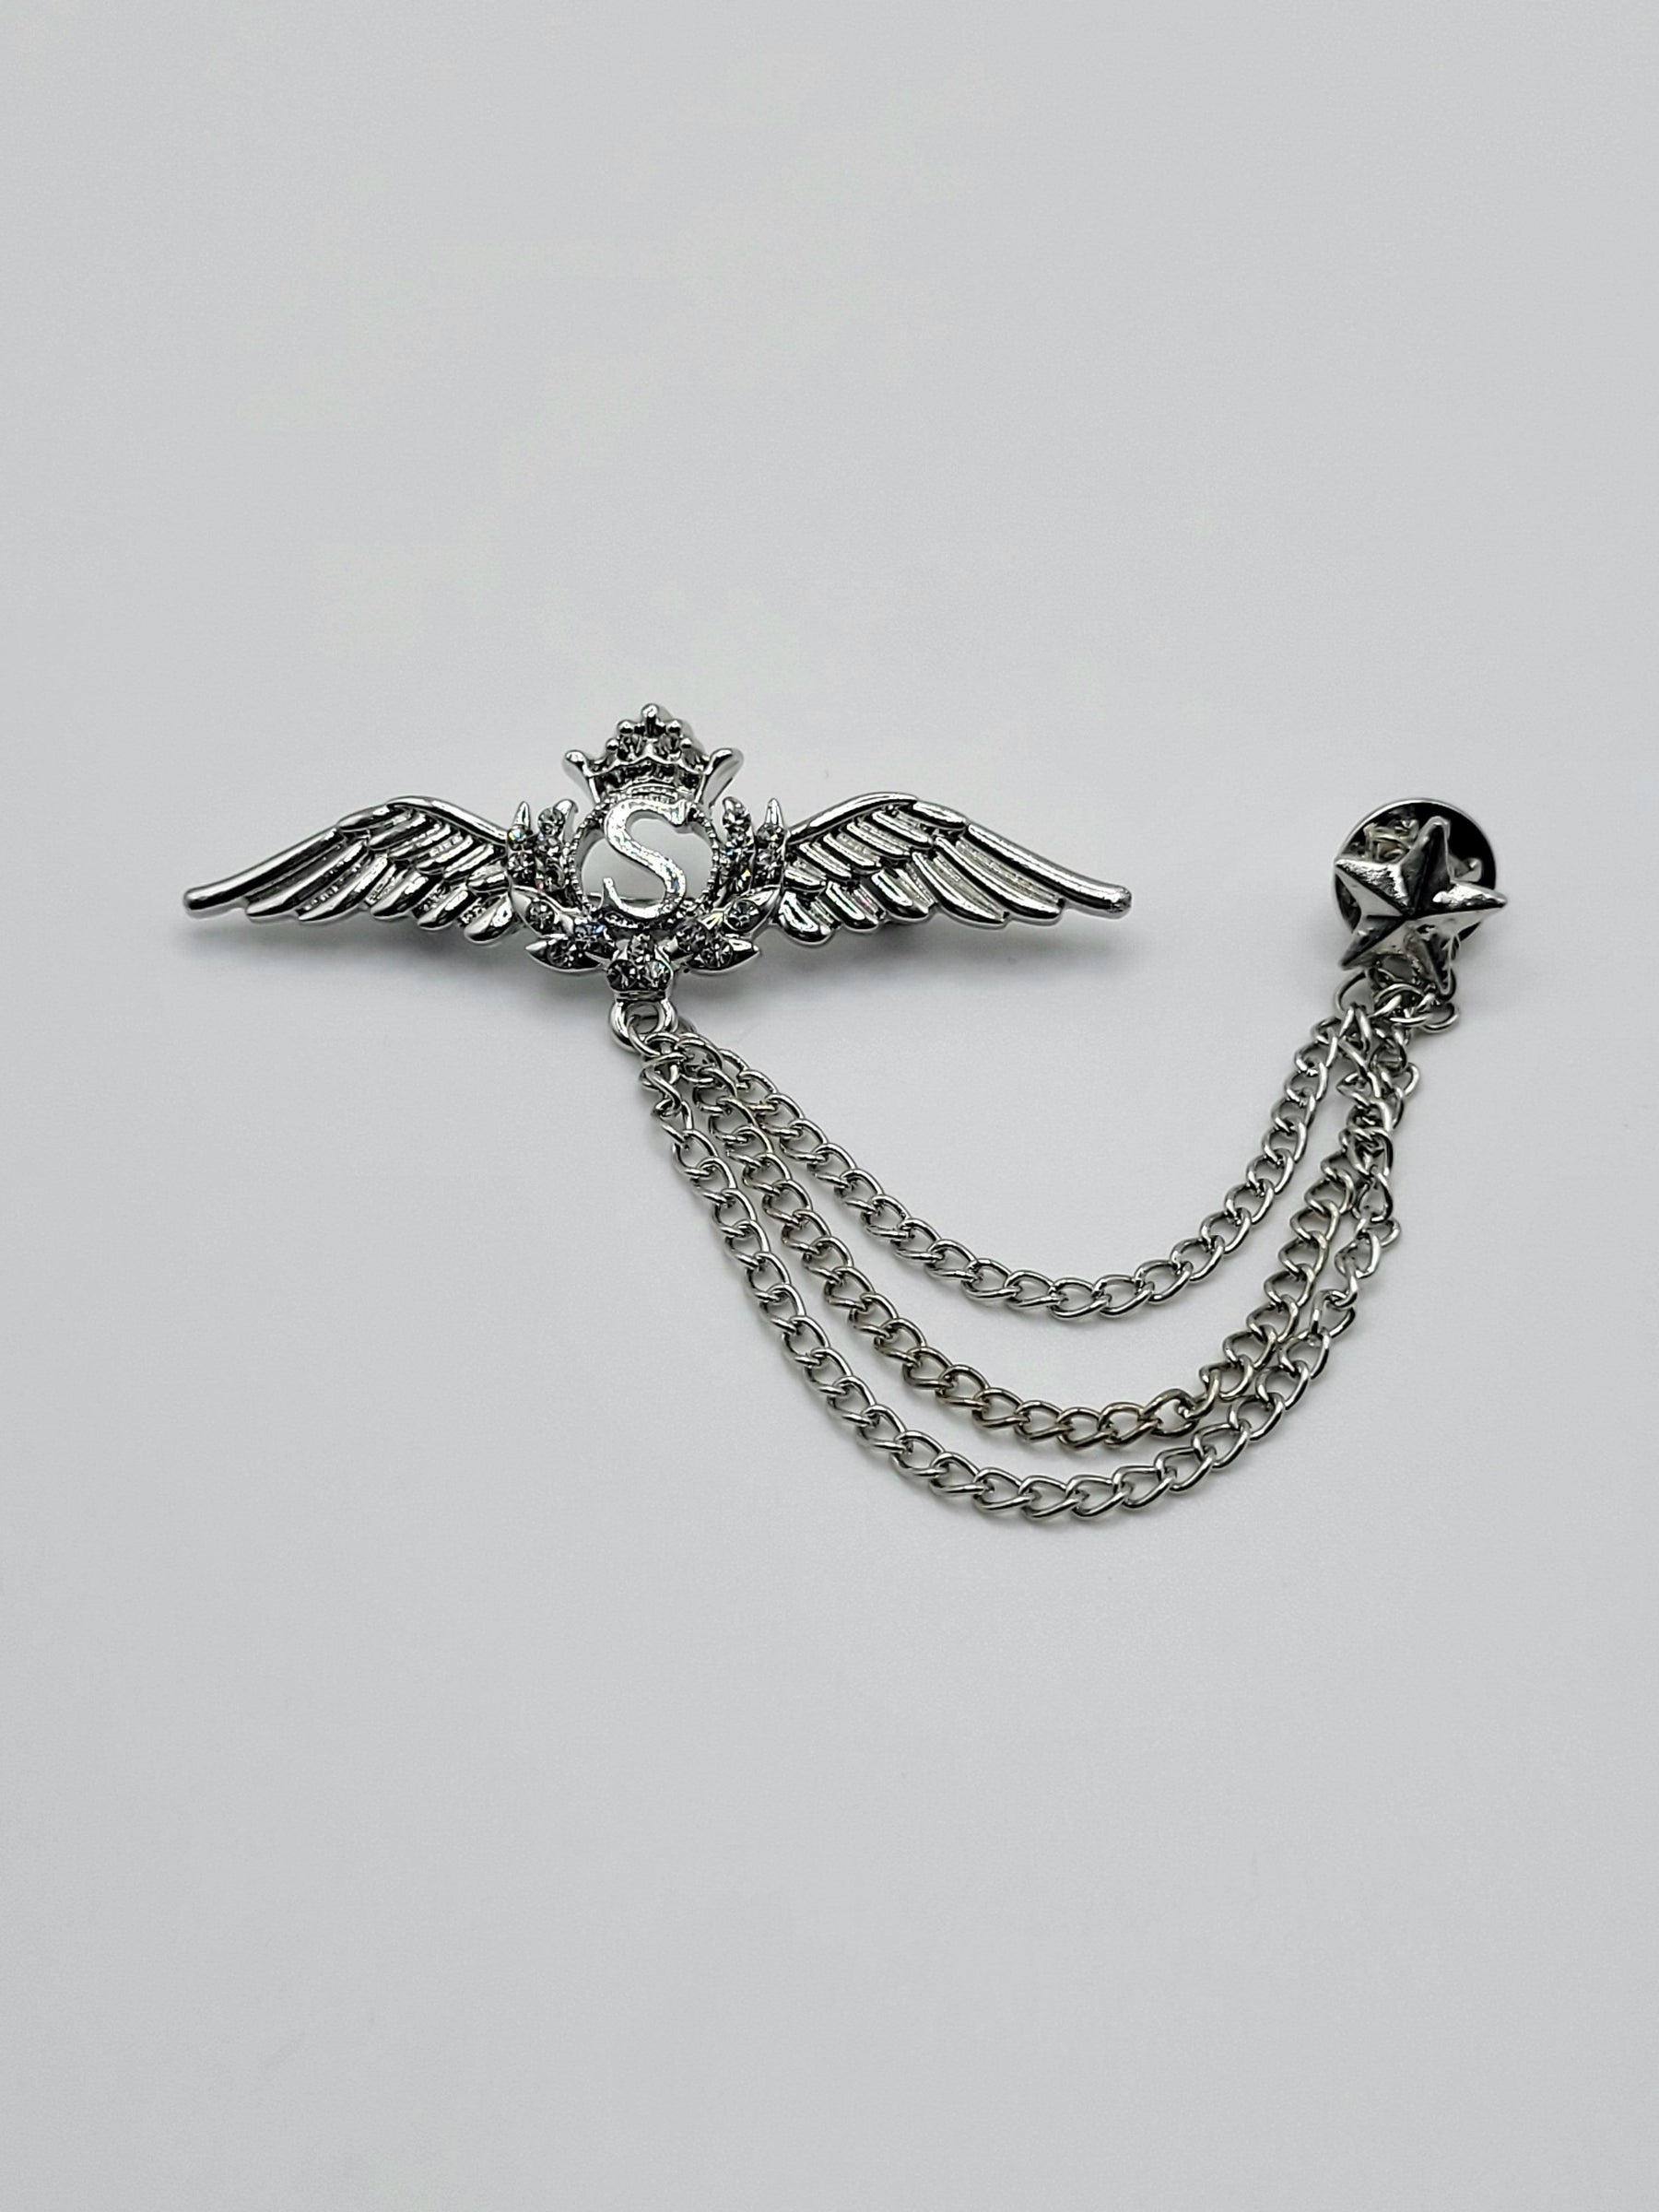 Silver Winged Lapel Chain - The Upscale Banker